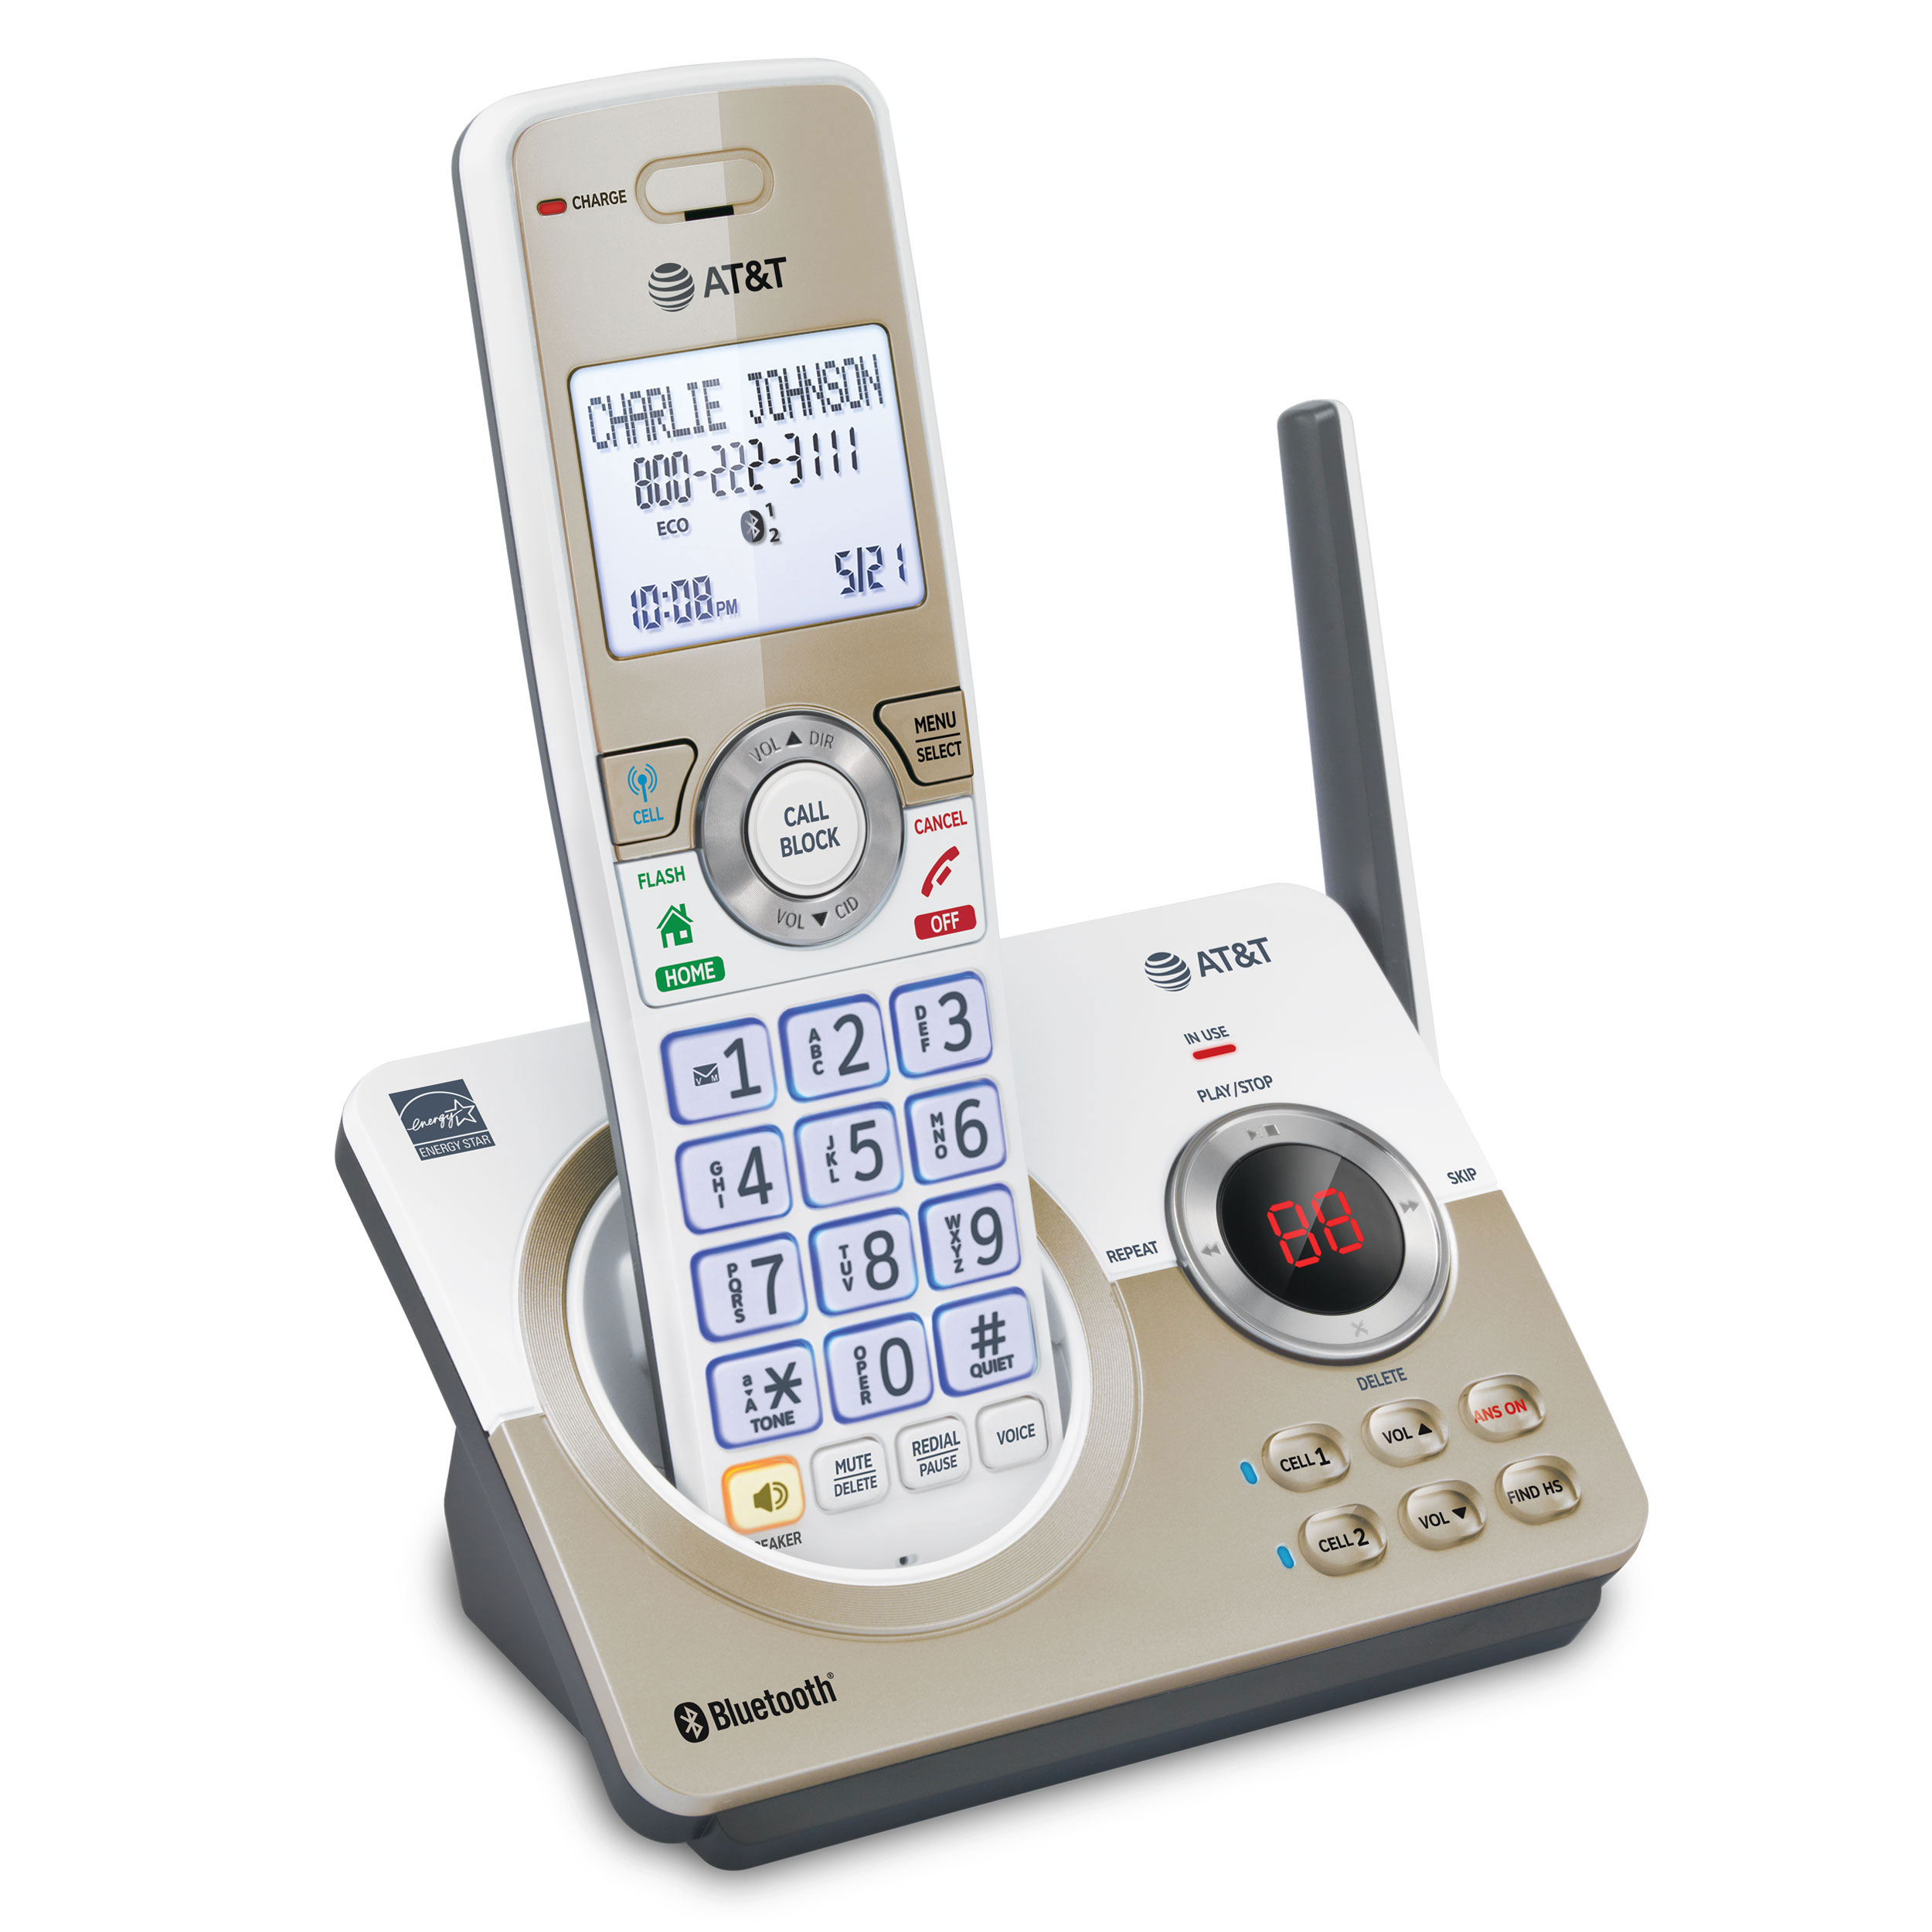 Expandable Cordless Phone with Unsurpassed Range, Bluetooth Connect to Cell™, Smart Call Blocker and Answering System, DL72130 - view 2